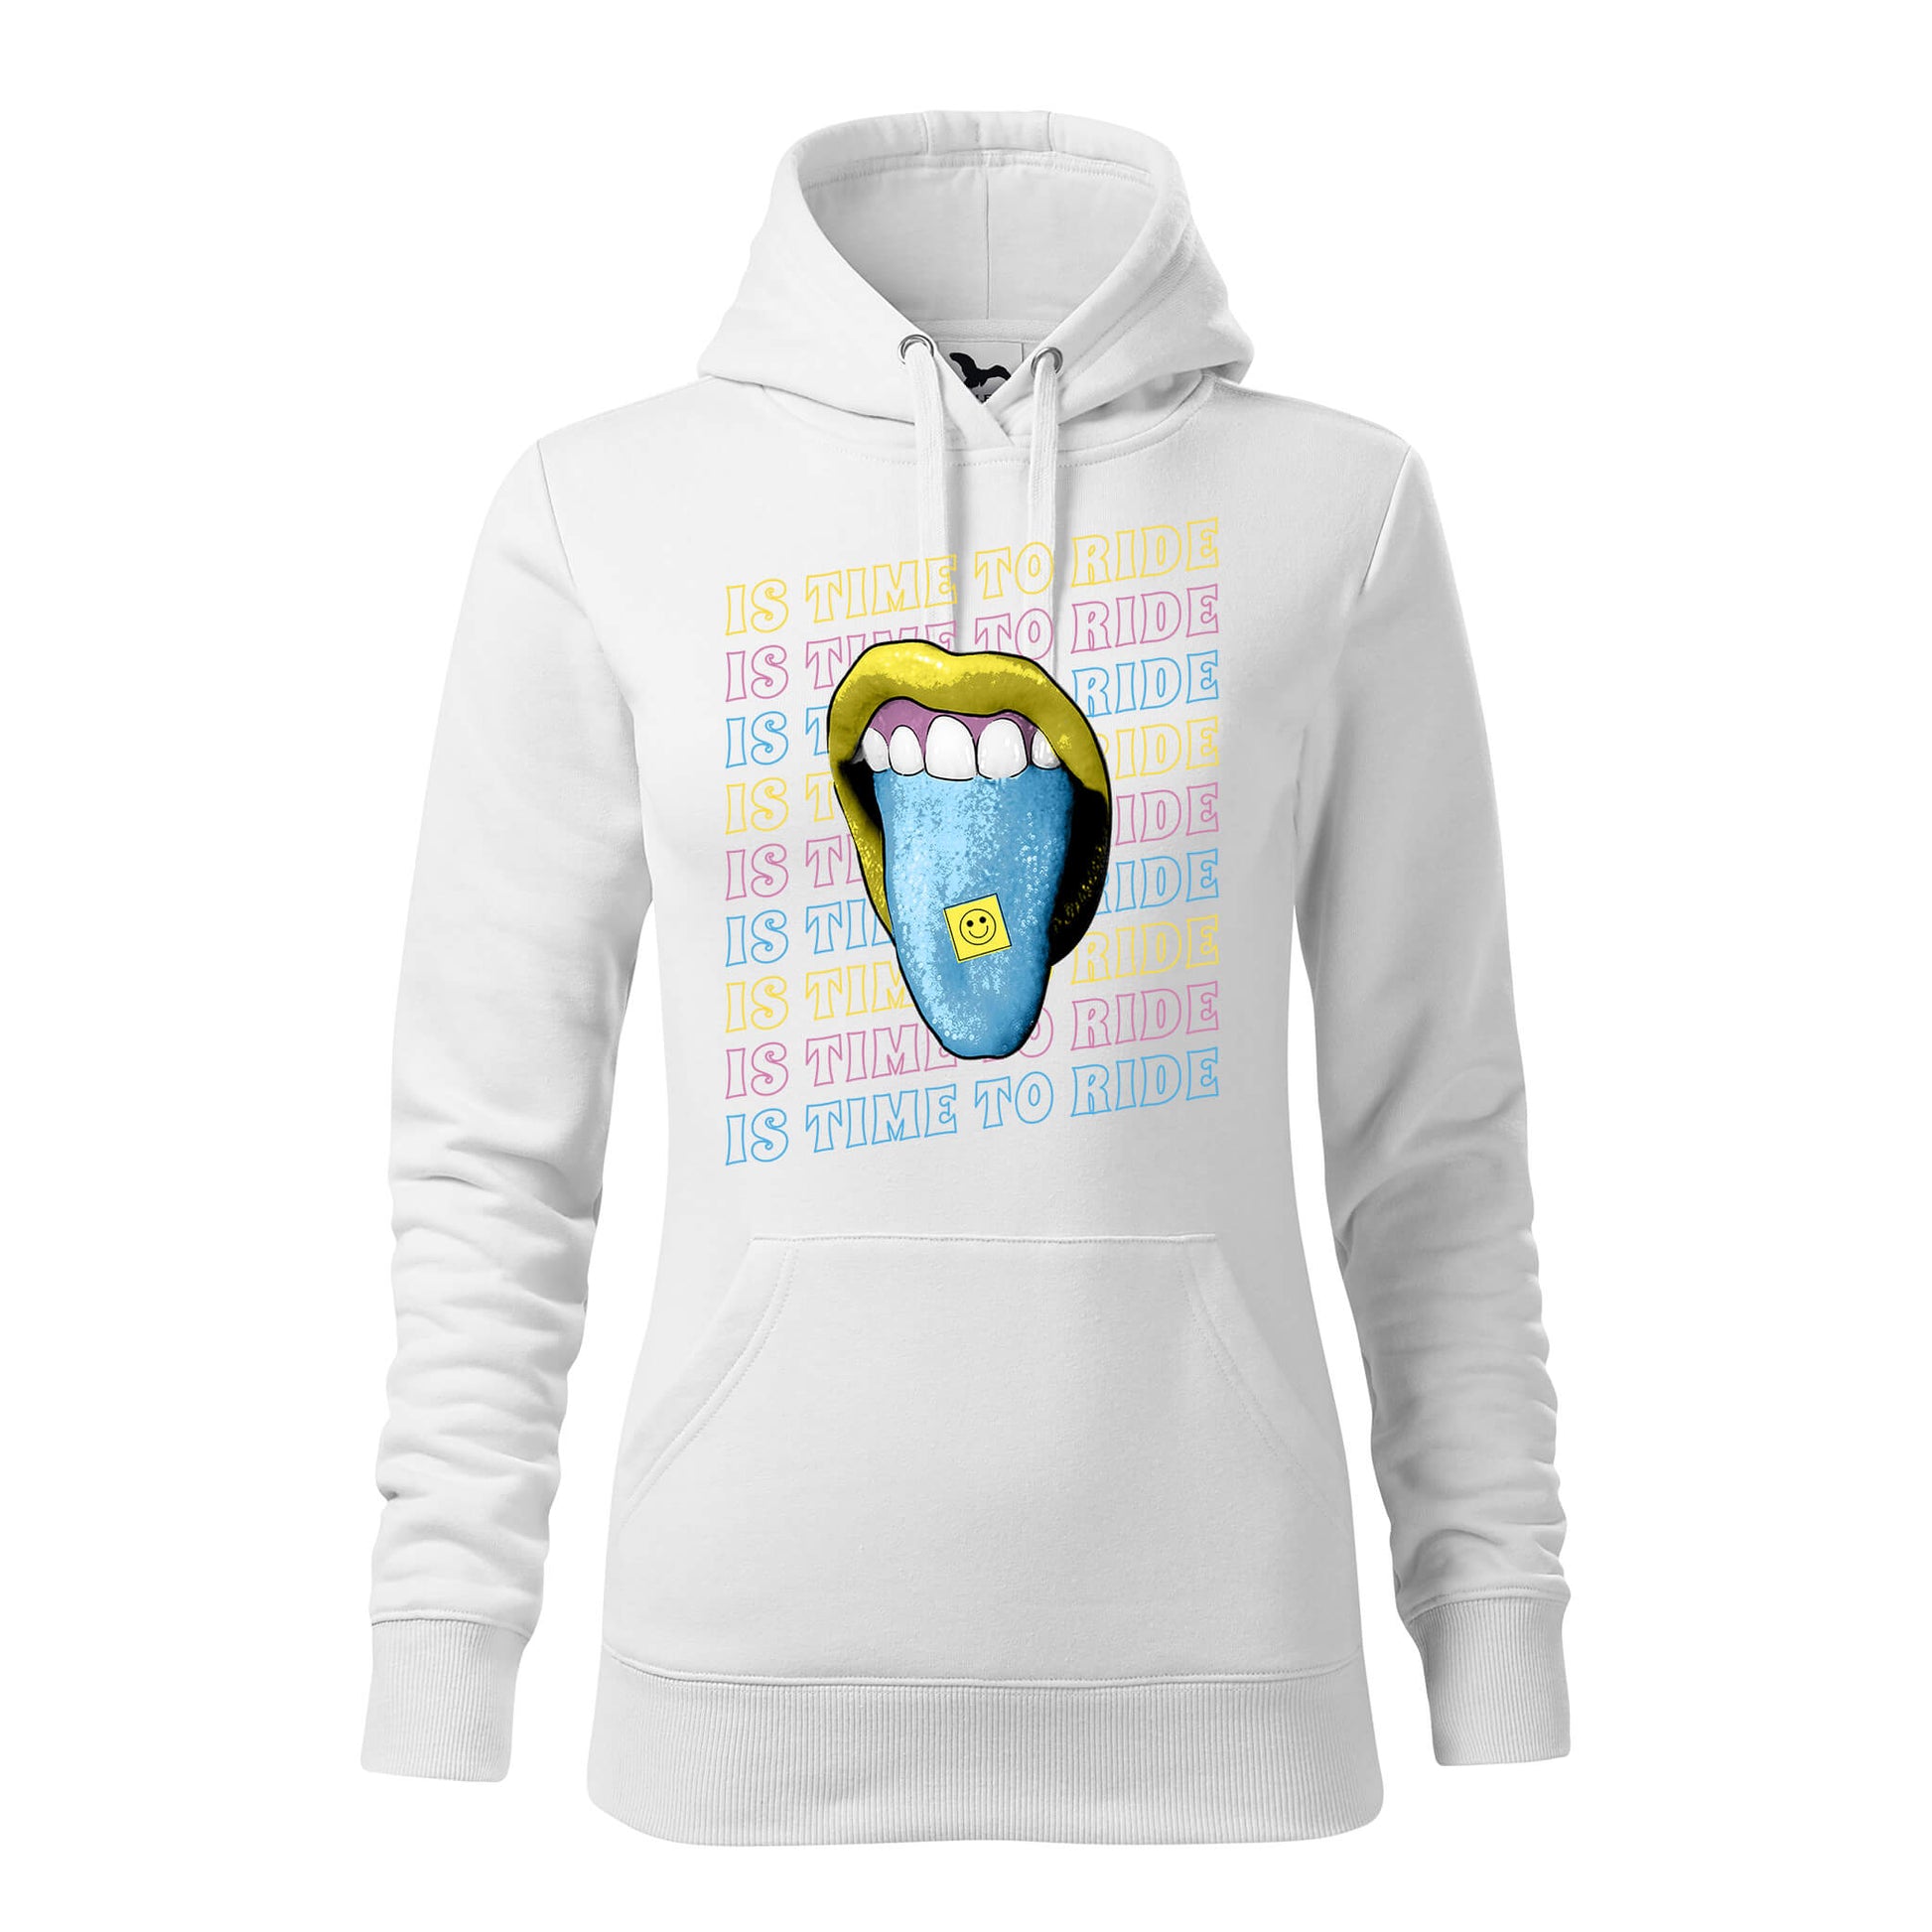 Its time to ride lsd hoodie - rvdesignprint